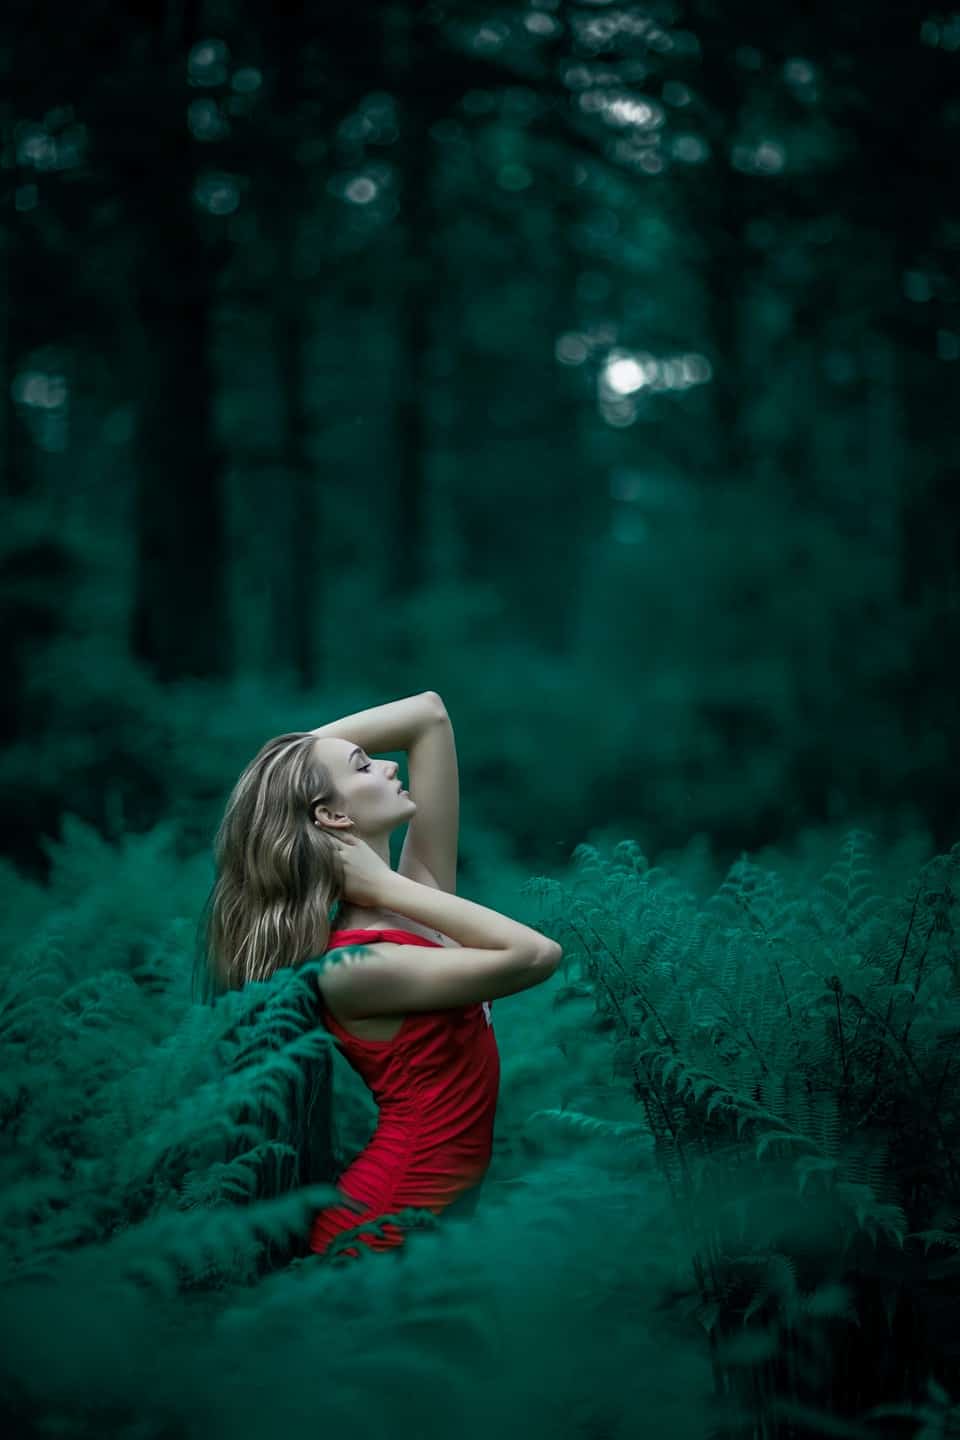 woman in red dress posing in forest